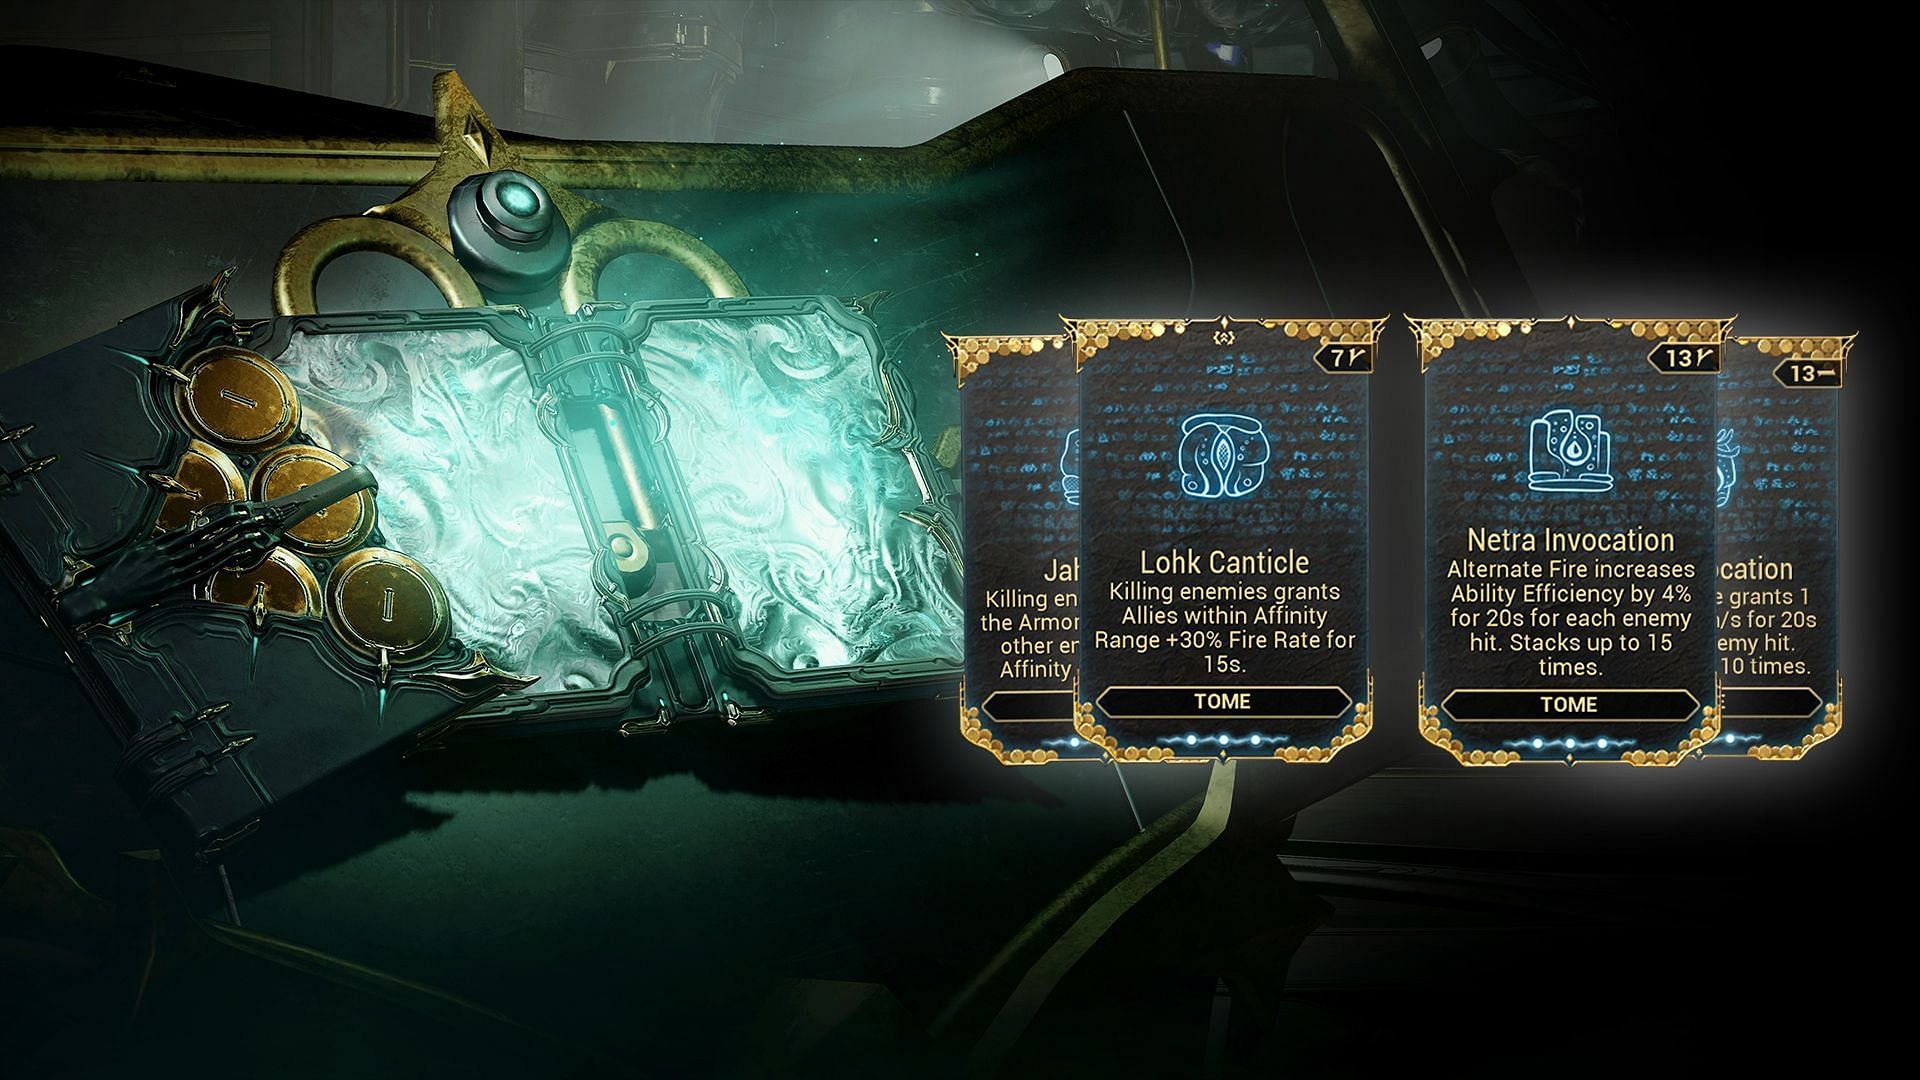 Tome mods can only be used in tome secondary weapons (Image via Digital Extremes)